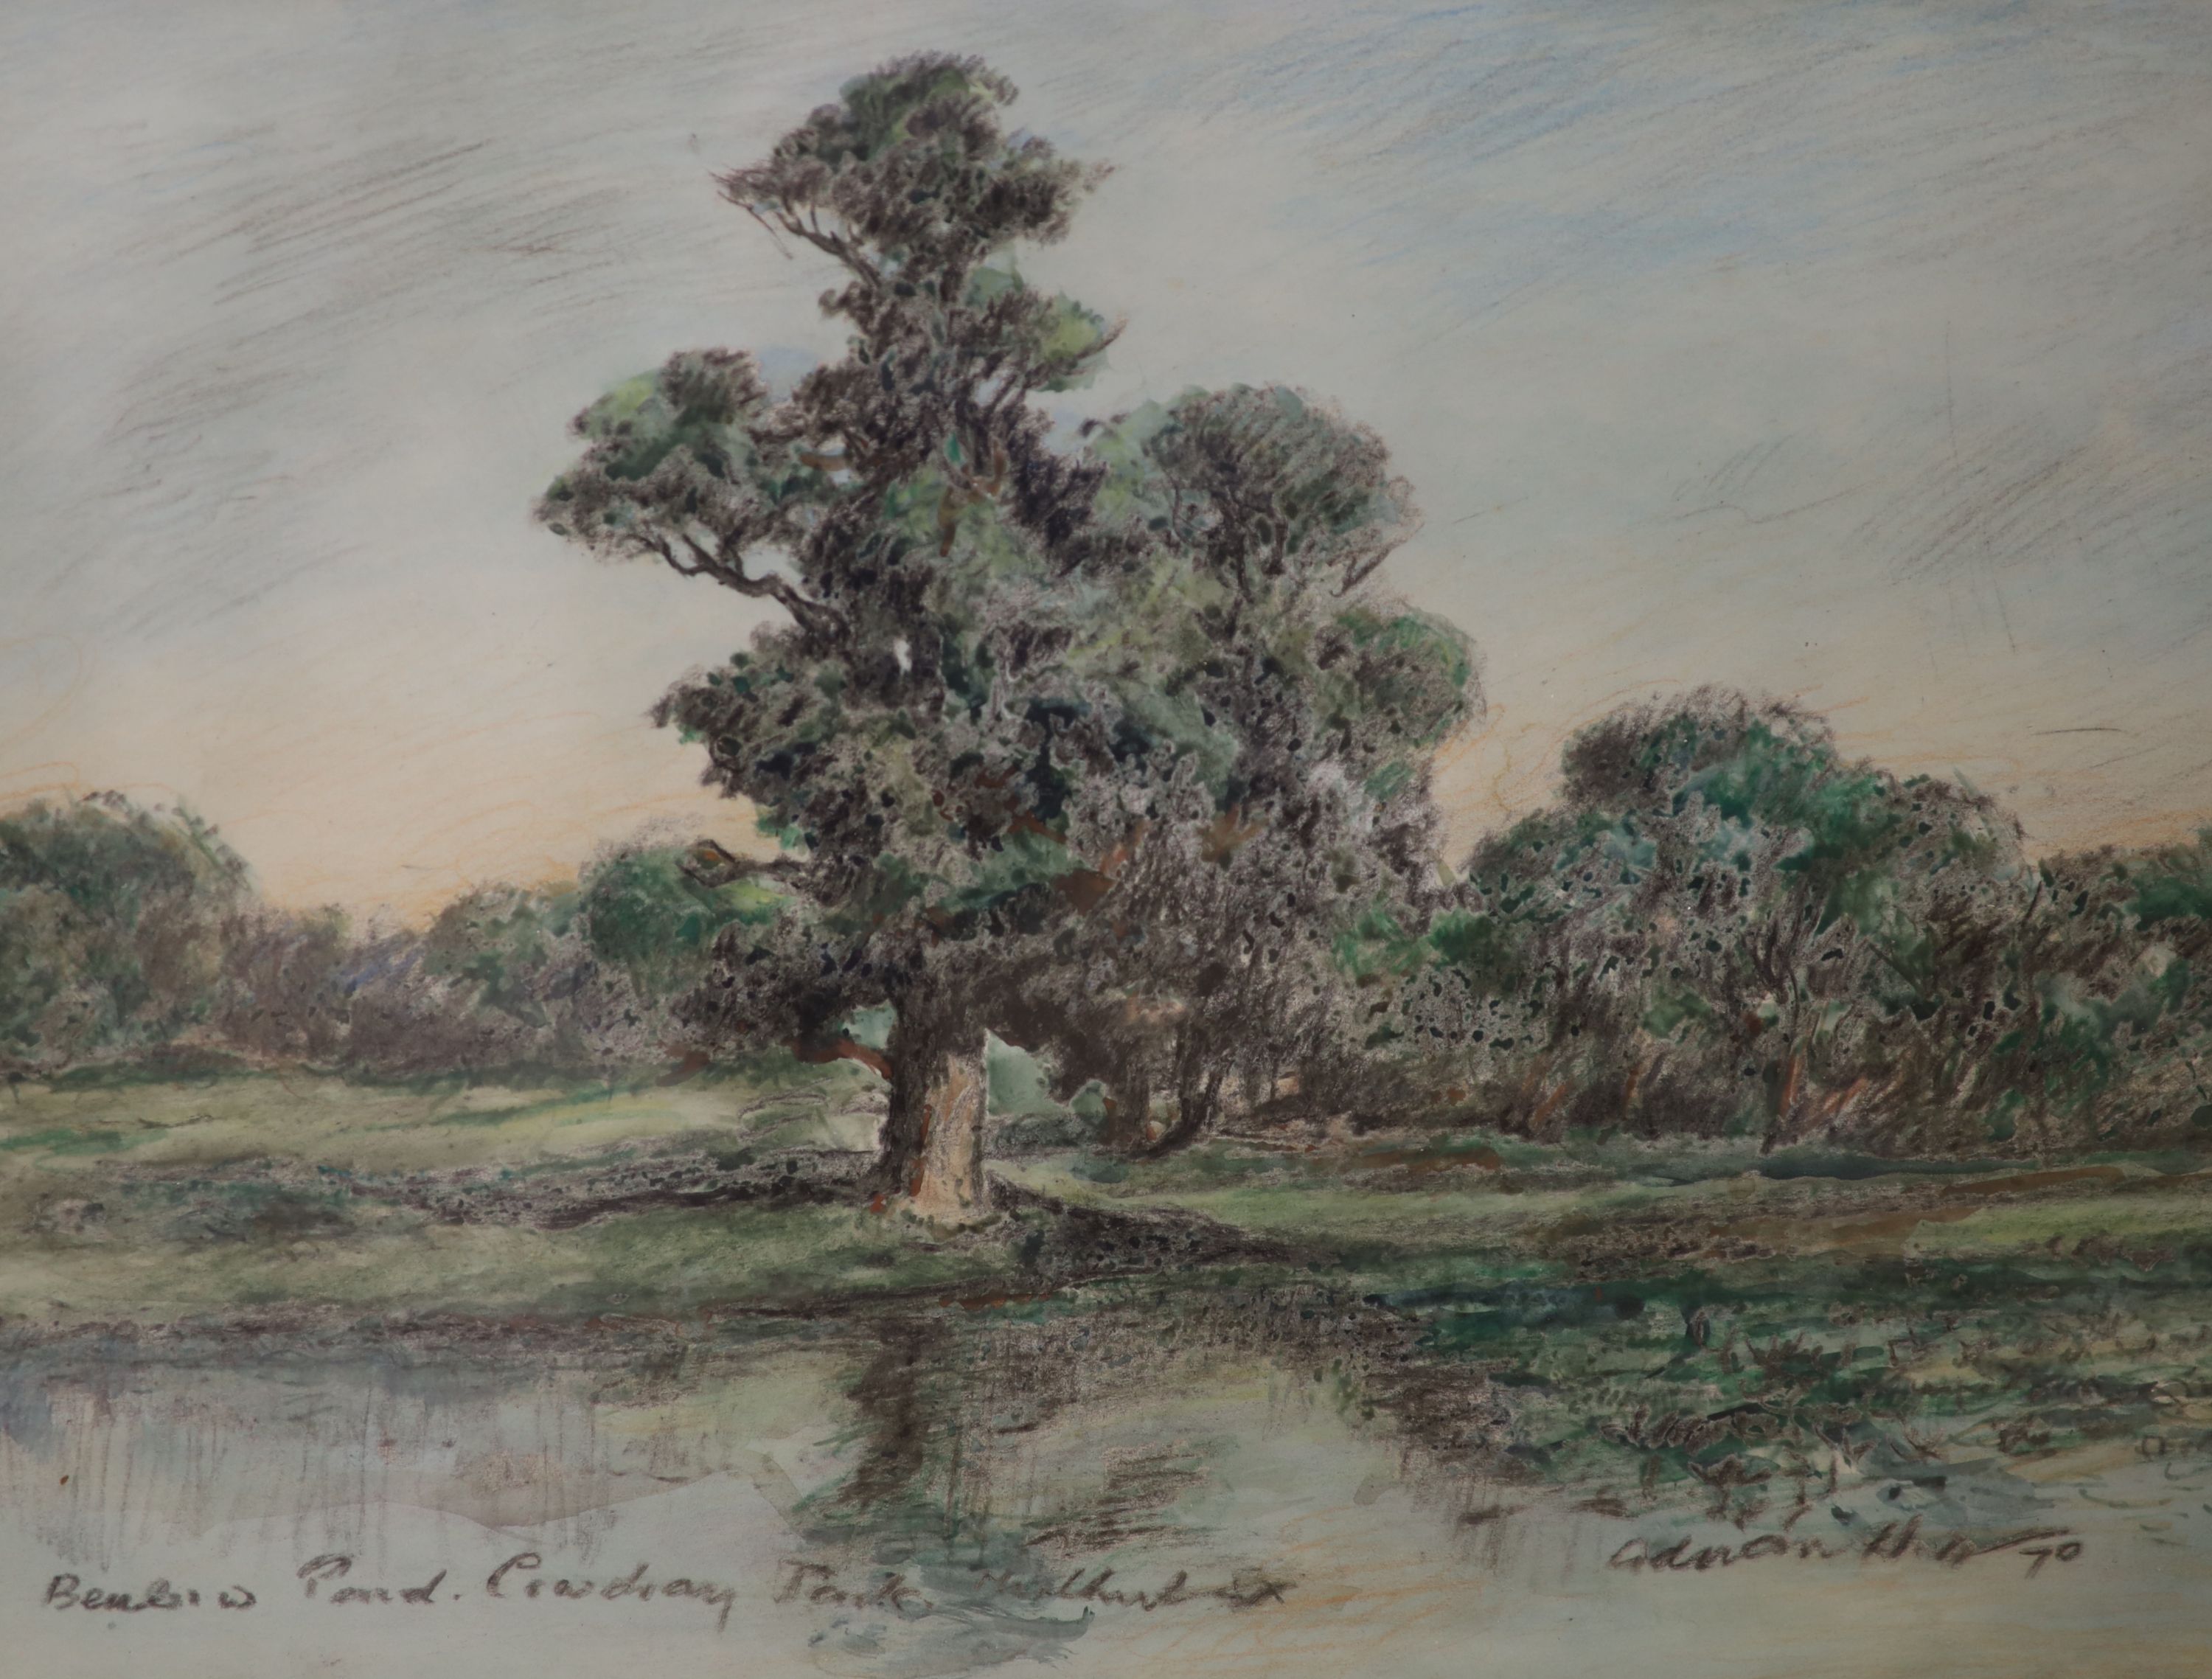 Adrian Hill (1895-1977), watercolour and charcoal, Bembo Pond, Cowdray Park, signed and dated 70, 26 x 36cm